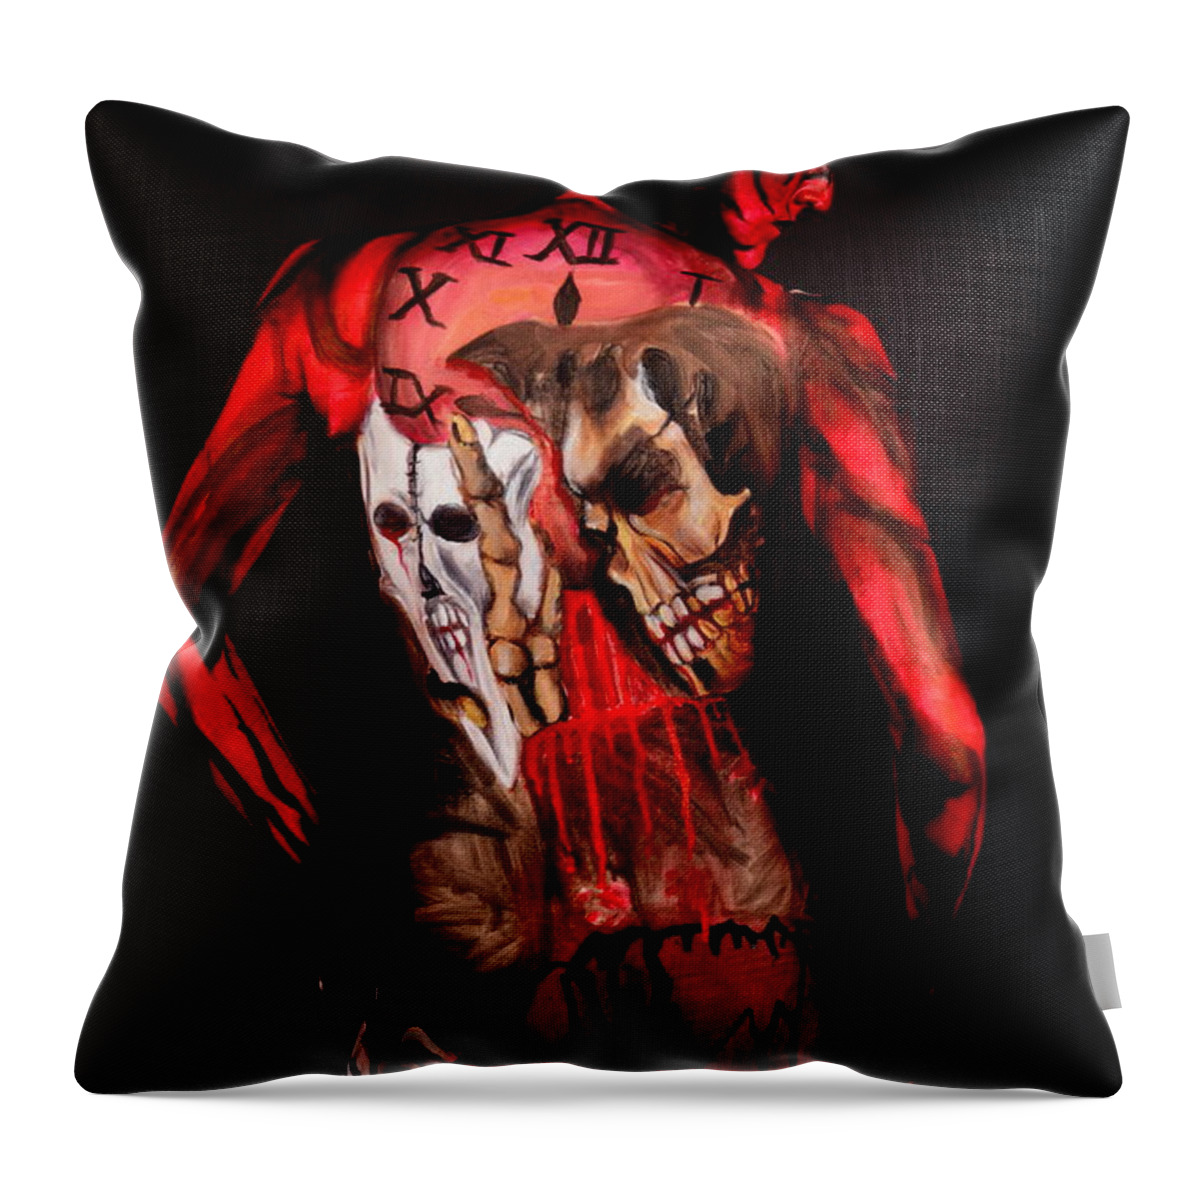 Edgar Allan Poe Throw Pillow featuring the photograph Edgar Allan Poe Tribute B by Angela Rene Roberts and Cully Firmin